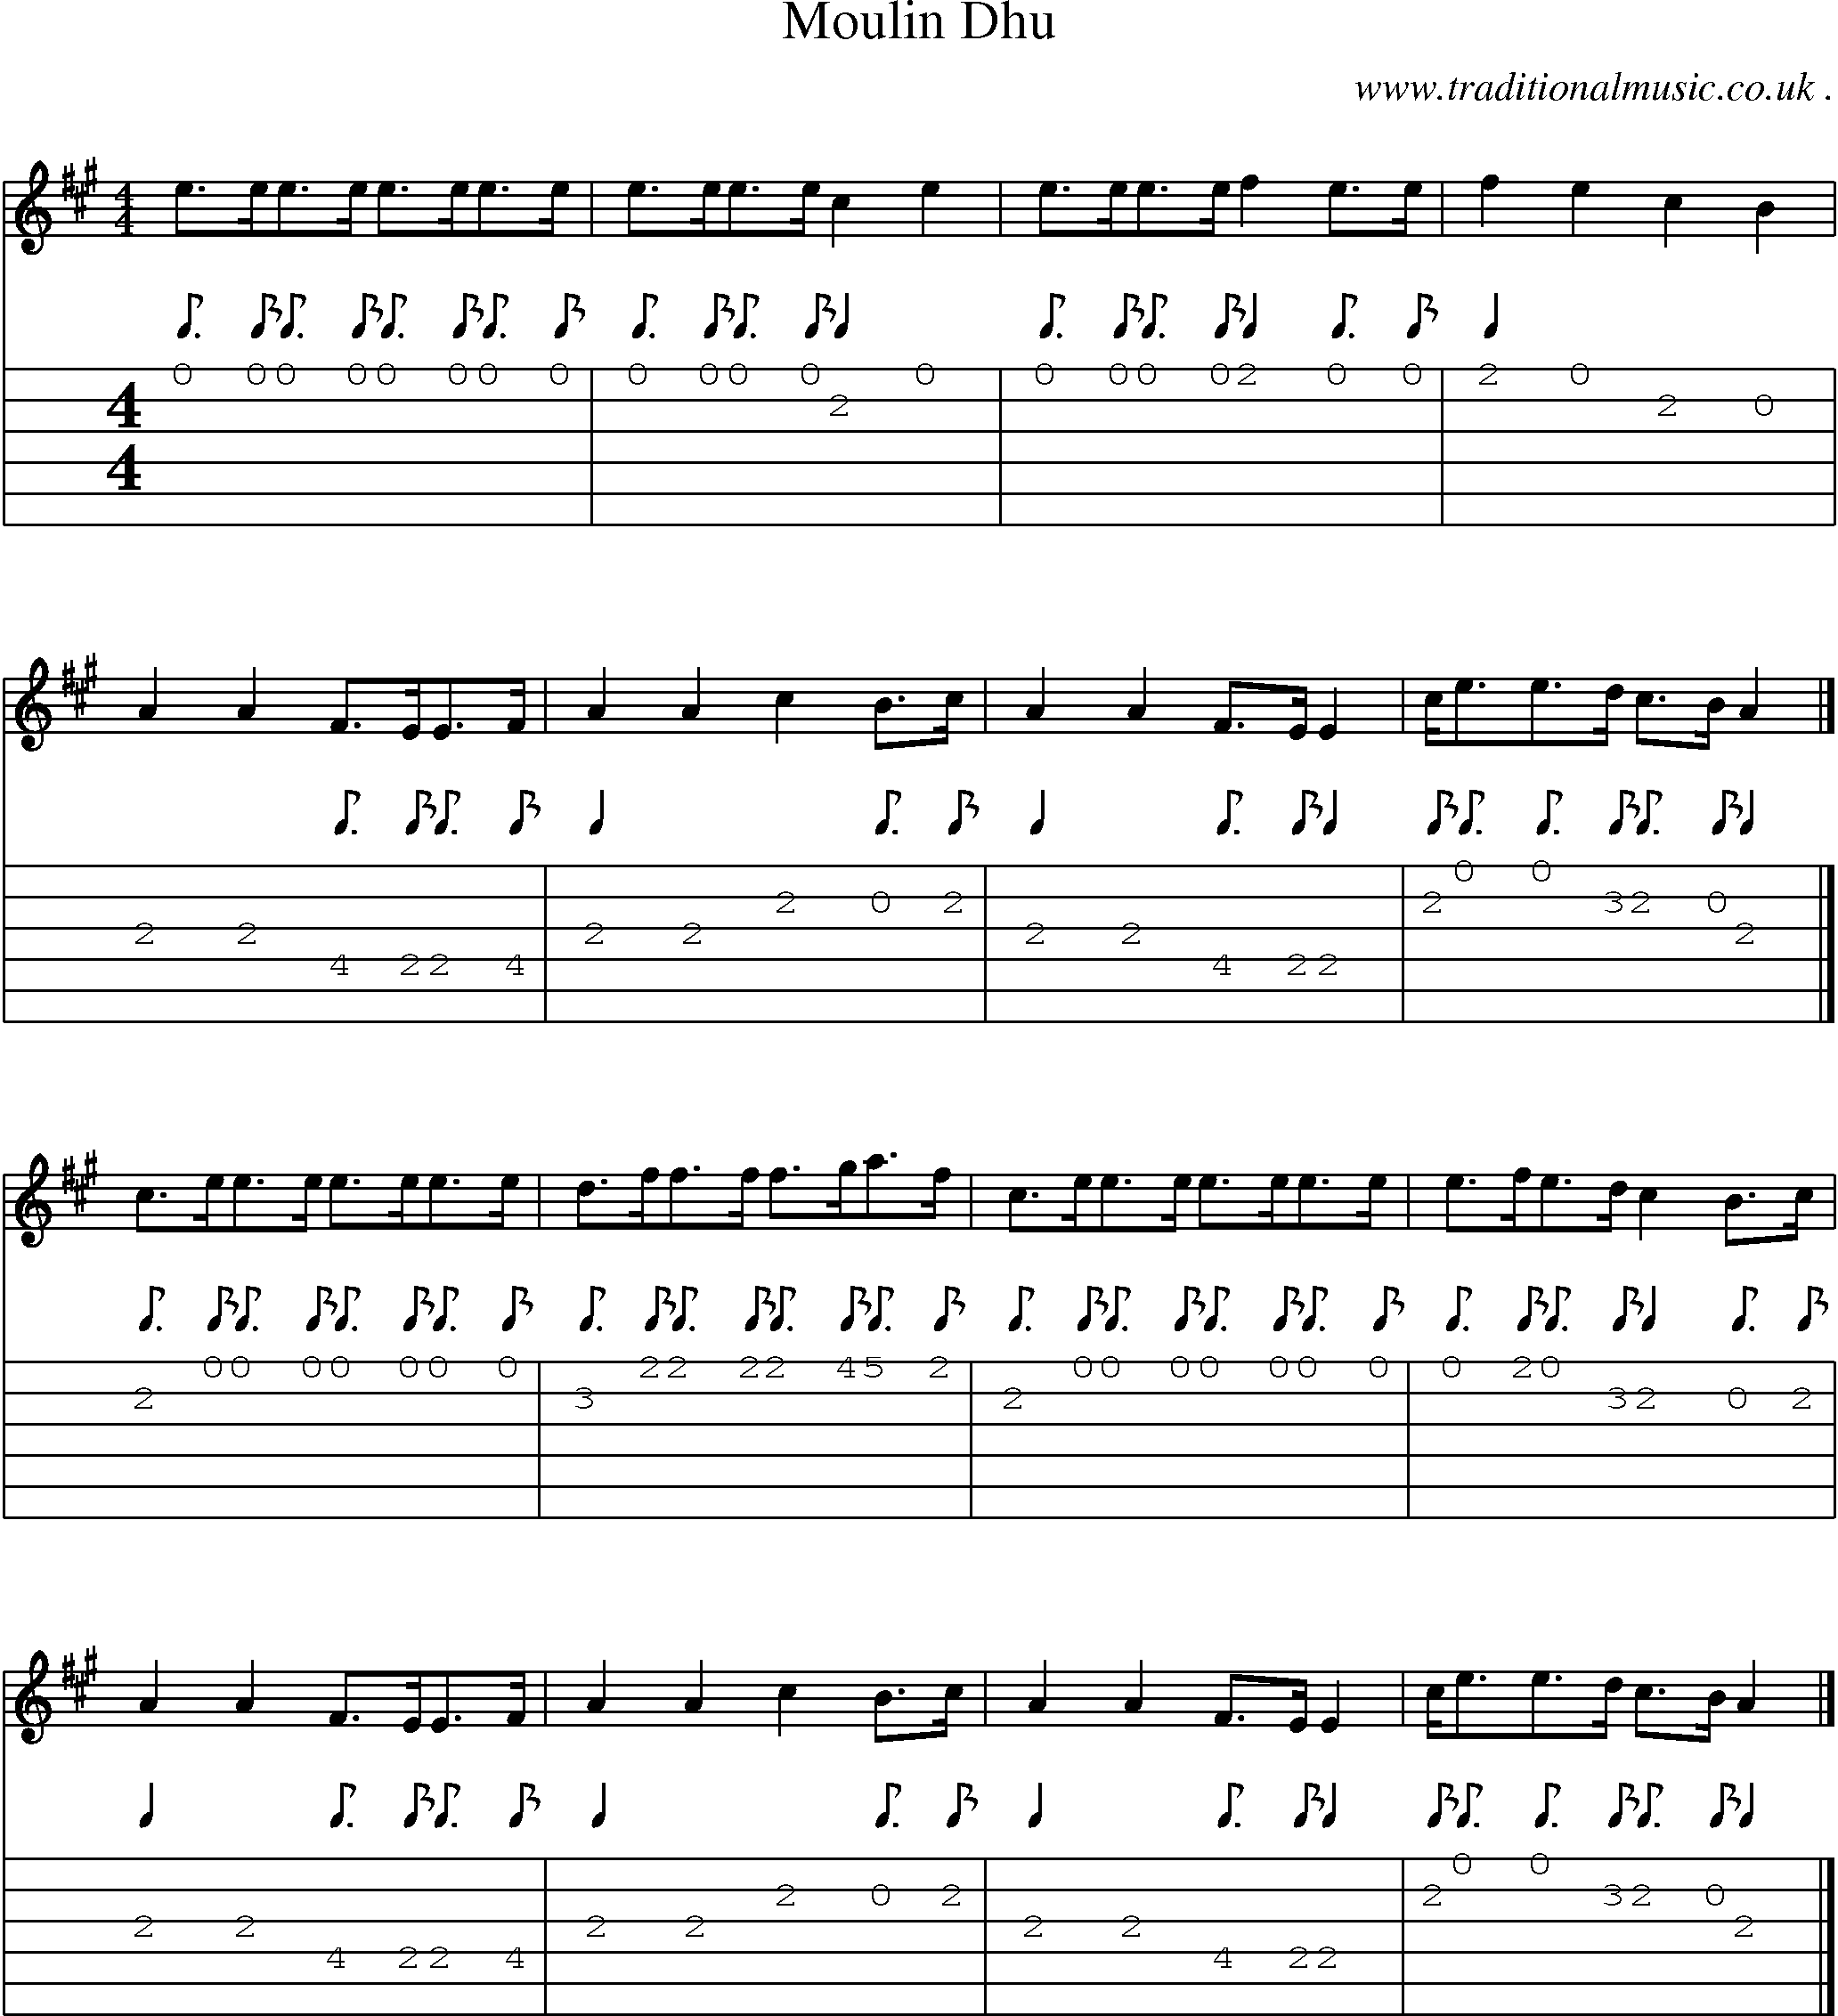 Sheet-music  score, Chords and Guitar Tabs for Moulin Dhu